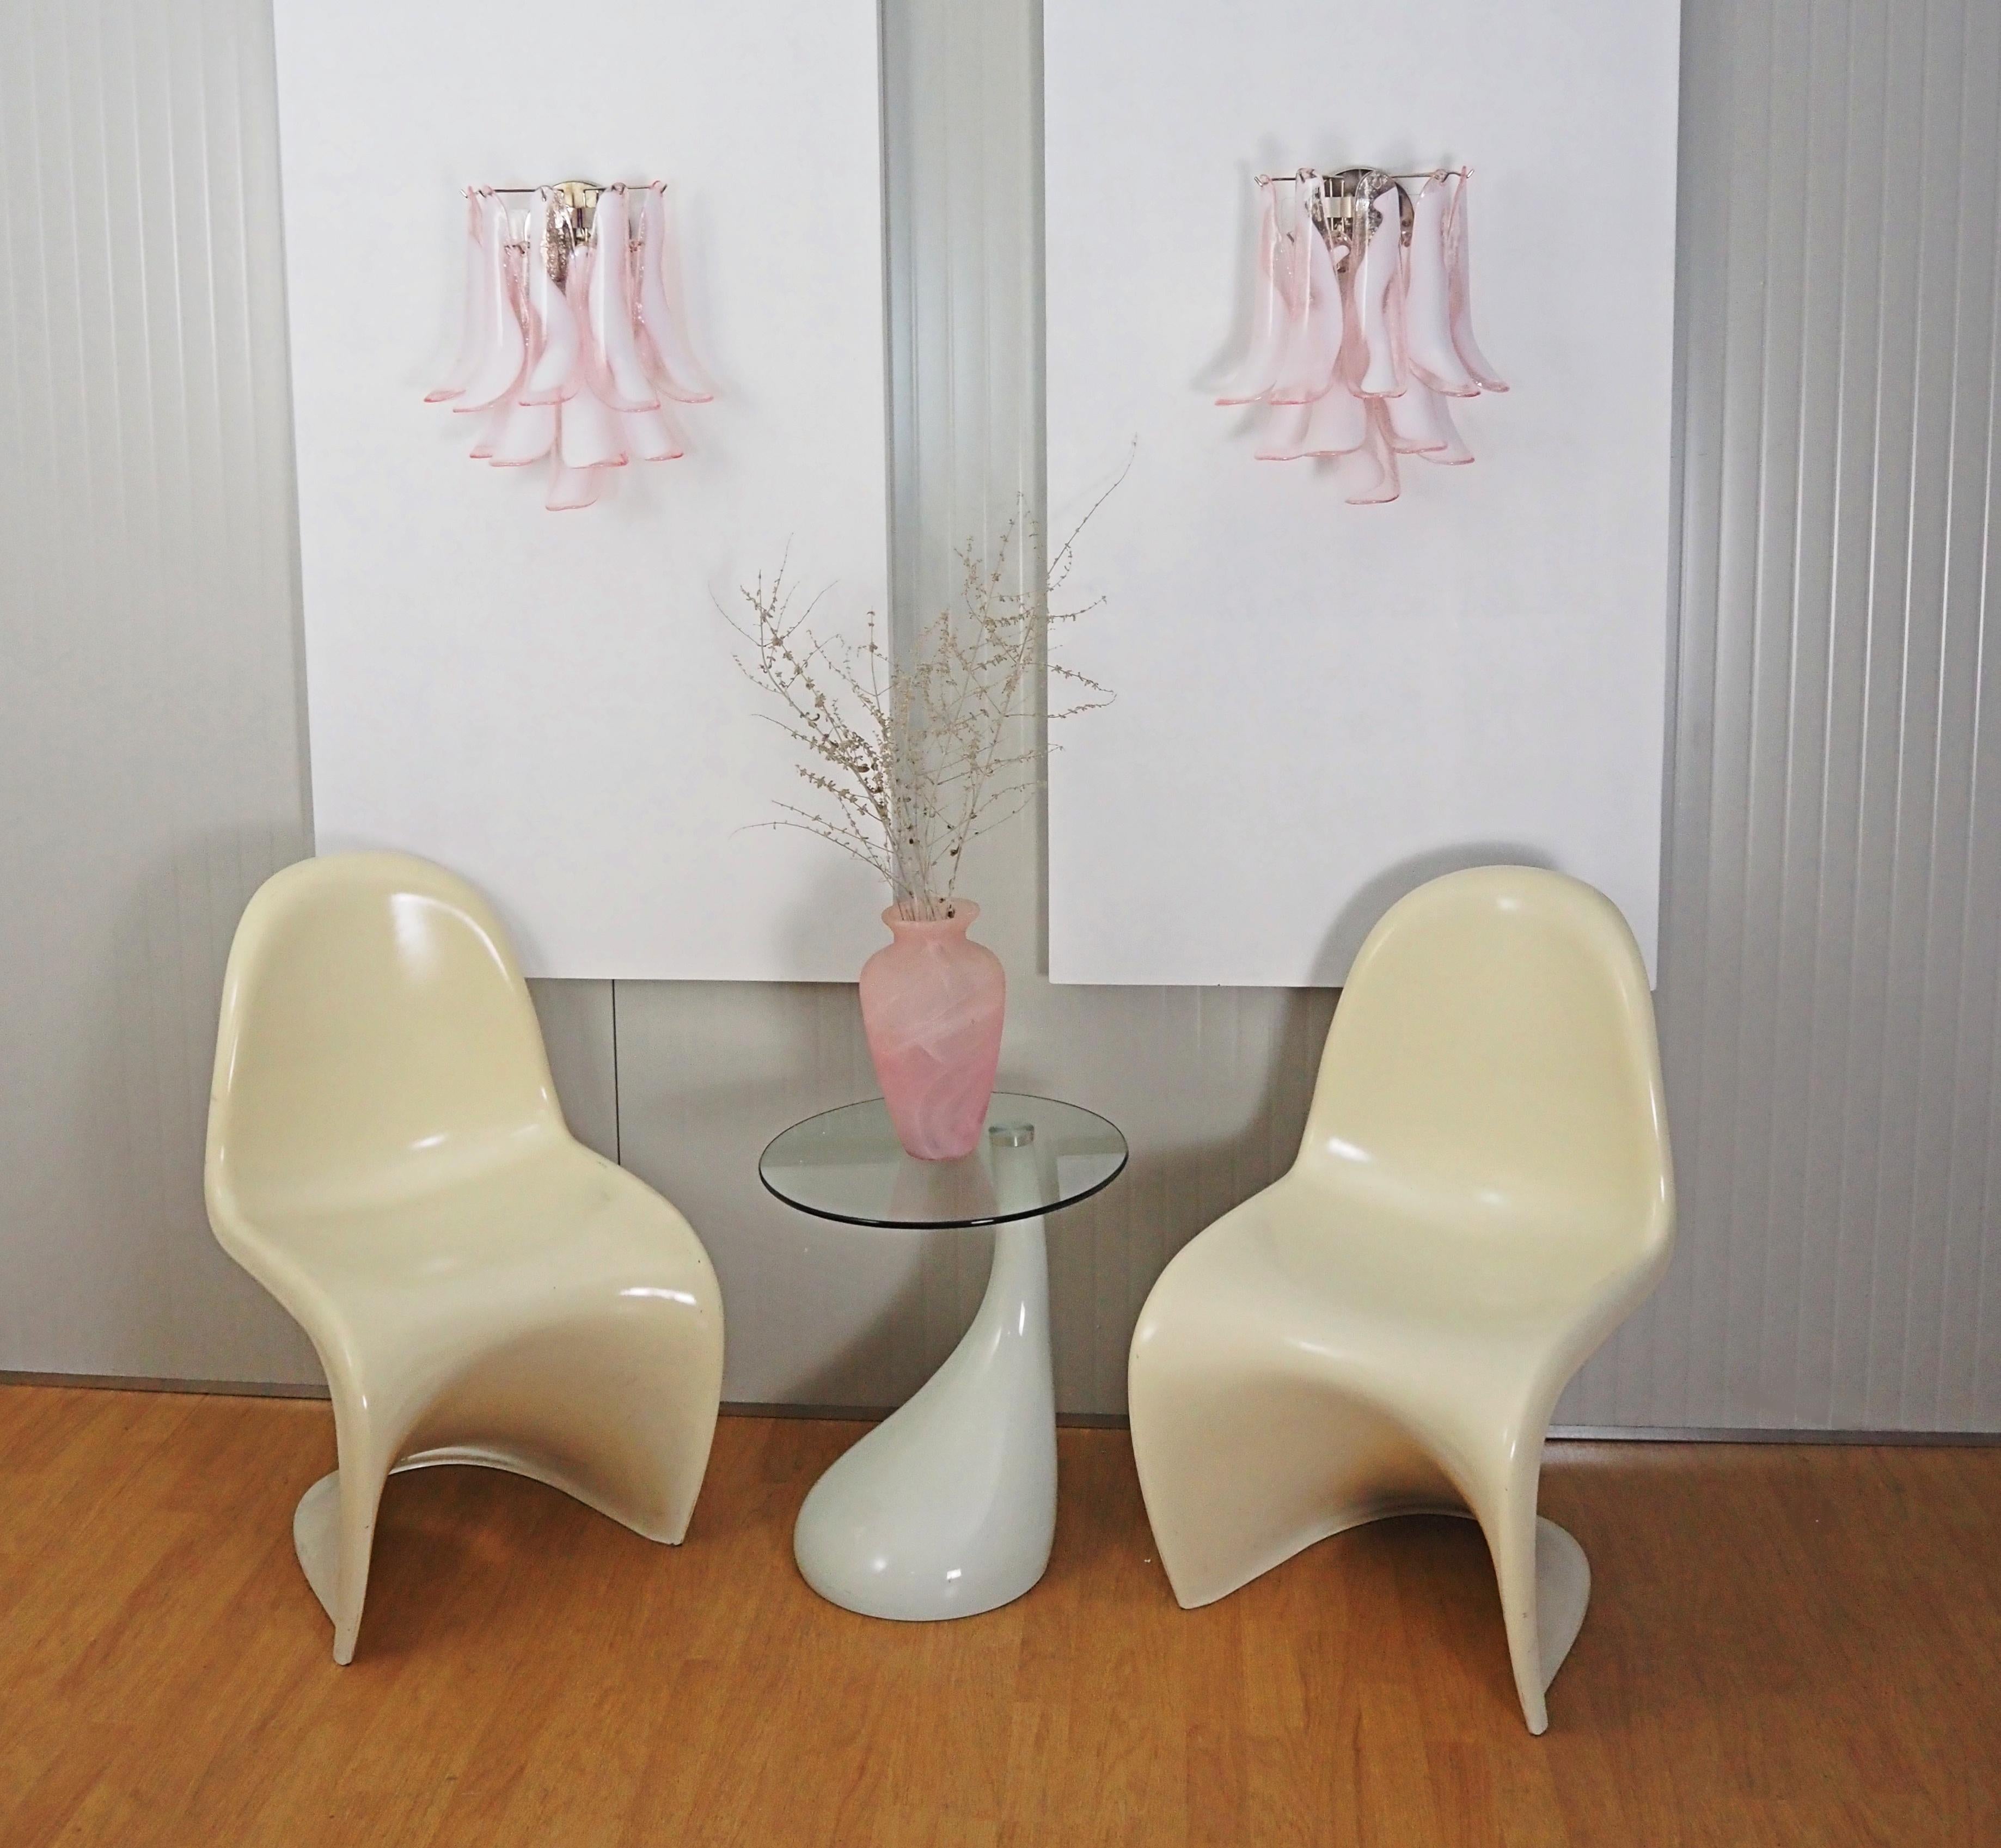 Pair of vintage Italian Murano appliques in the manner of Mazzega. Wall lights have 10 pink and white “lattimo” glasses (for each applique) in a nickel-plated metal frame.
Period: late 20th century
Dimensions: 16,50 inches (42 cm) height; 13,80